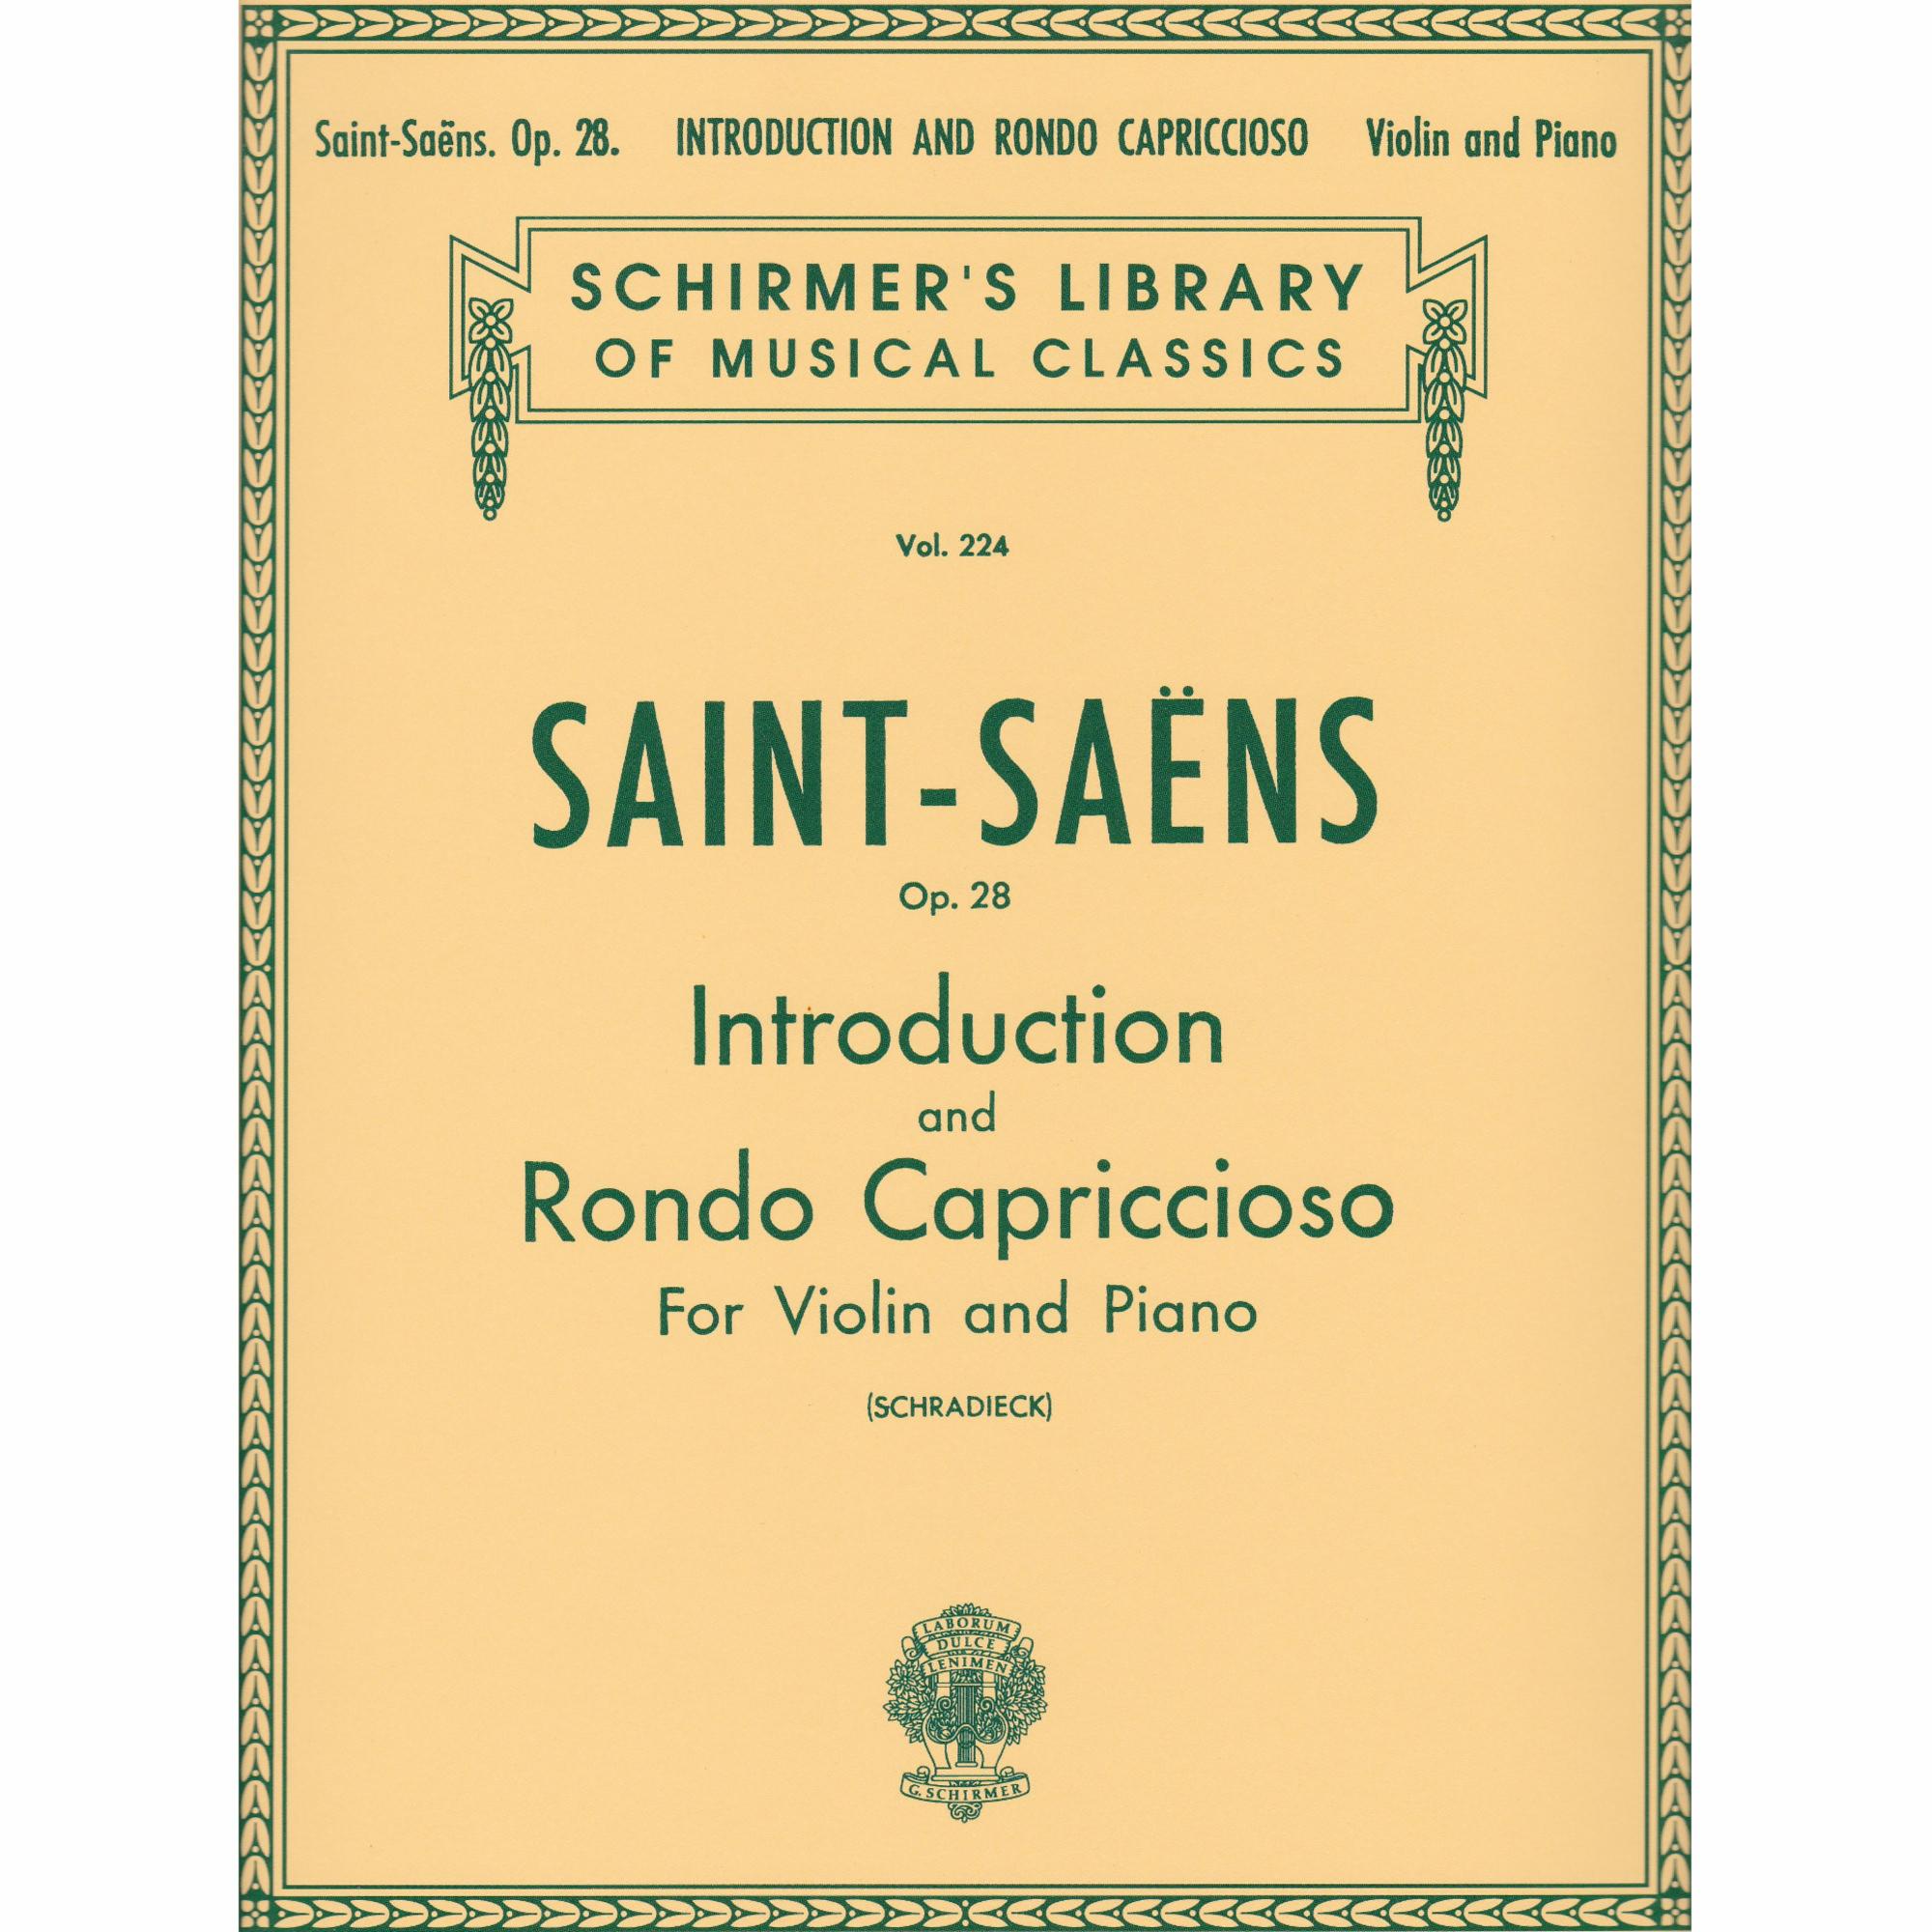 Saint-Saens -- Introduction and Rondo Capriccioso, Op. 28 for Violin and Piano